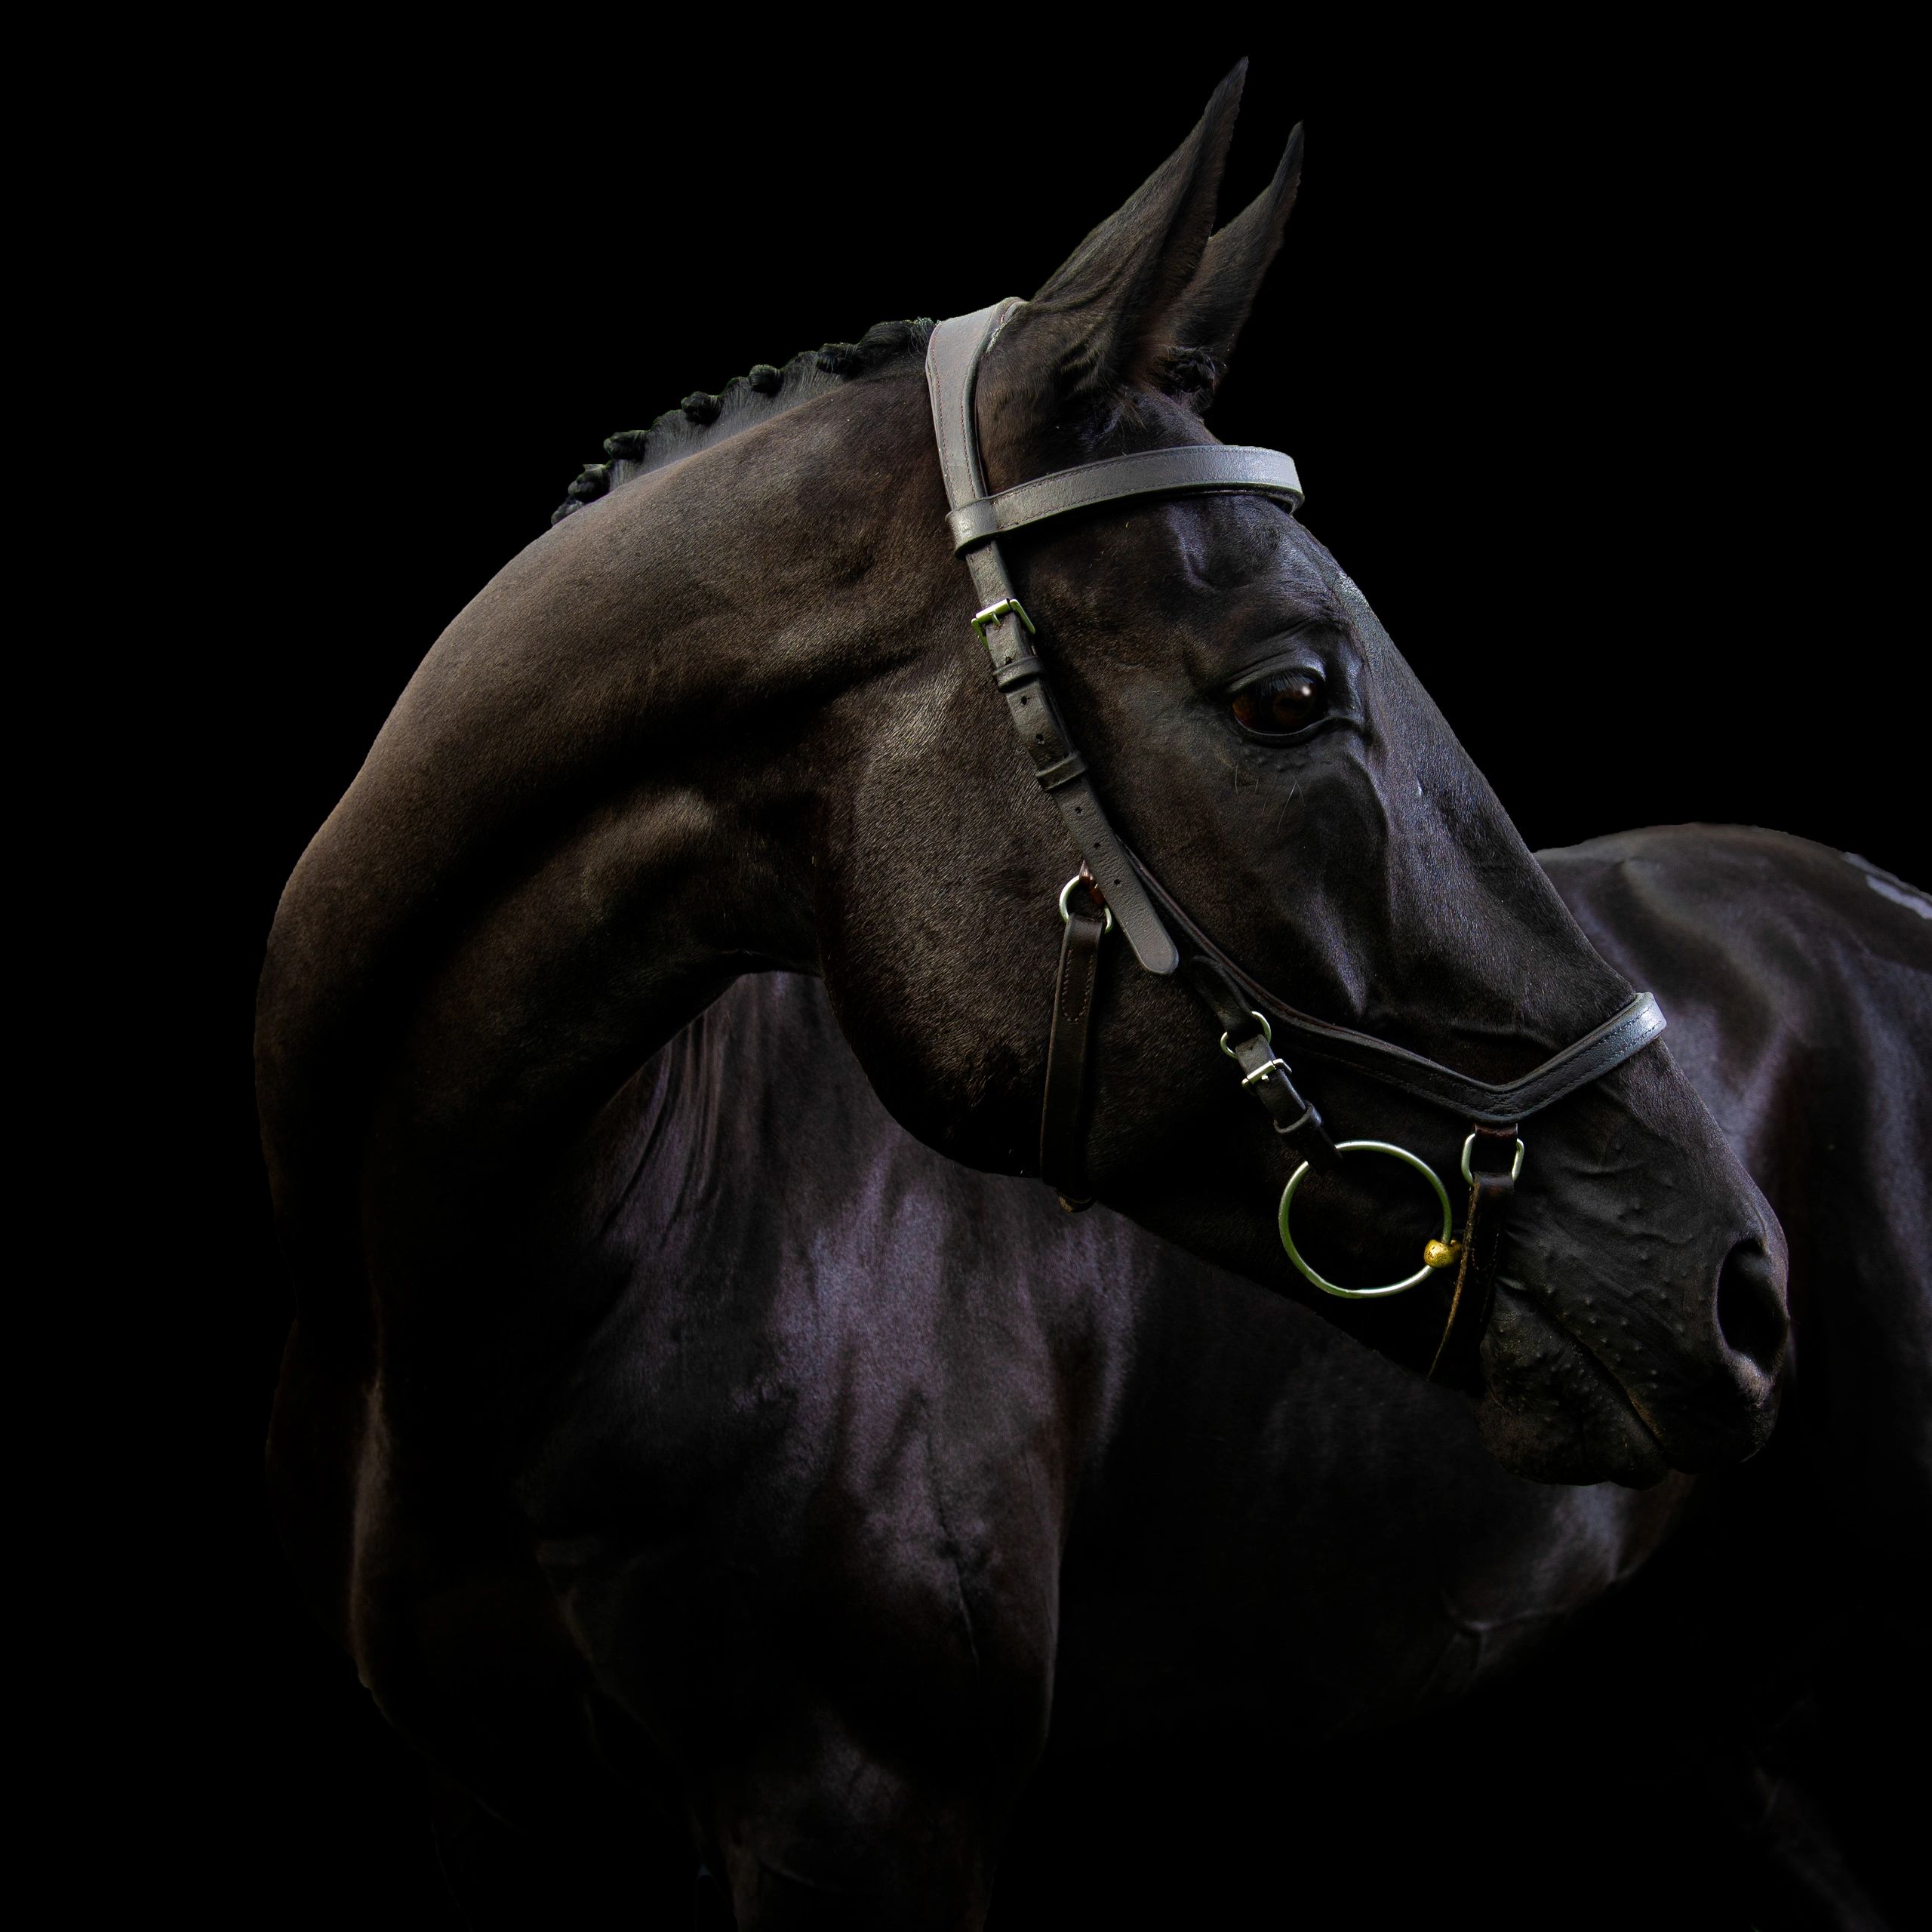 equine photography, horse photography, horse portrait, equine portrait, horse studio, fine art